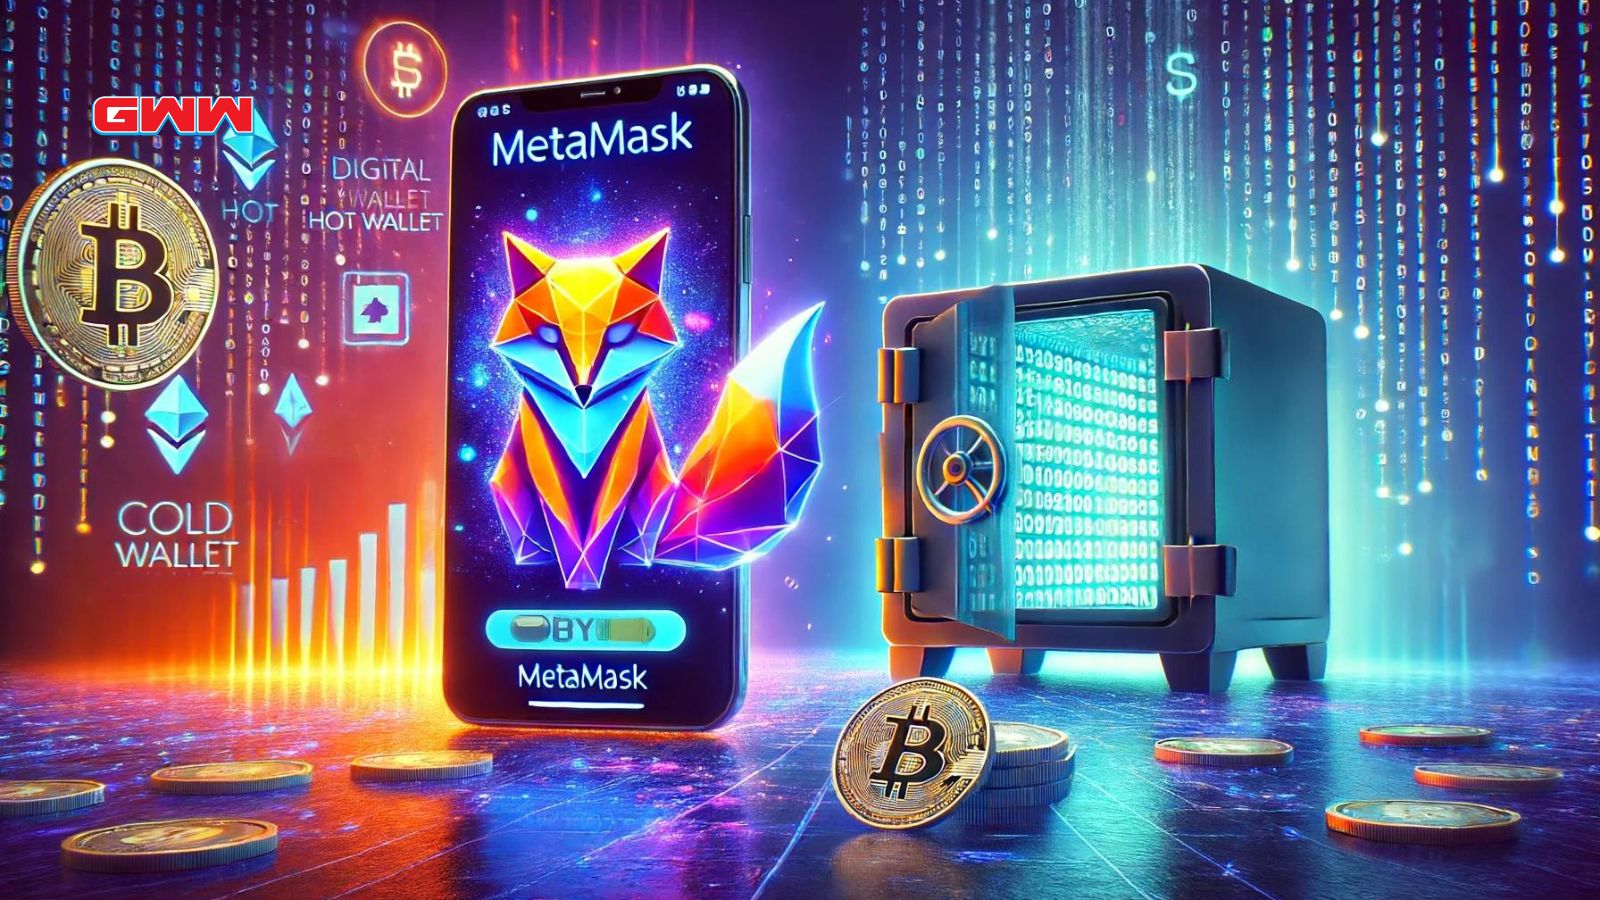 A scene with a digital, vibrant theme indicating it's a hot wallet.